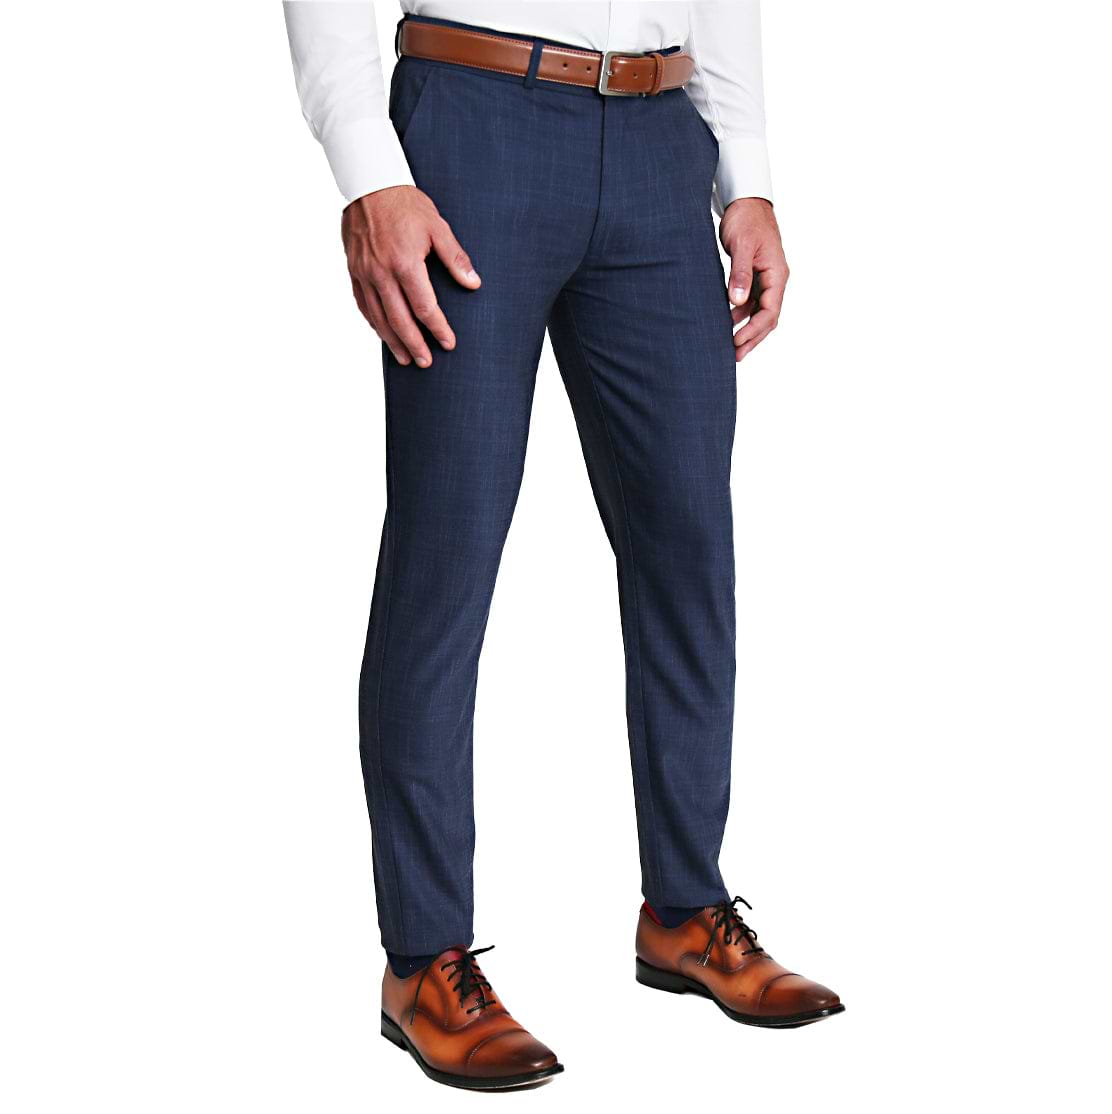 Buy CLITHS Navy Blue Formal Pants for Men Slim Fit/Flat Front Fromal  Trousers for Men Cotton at Amazon.in